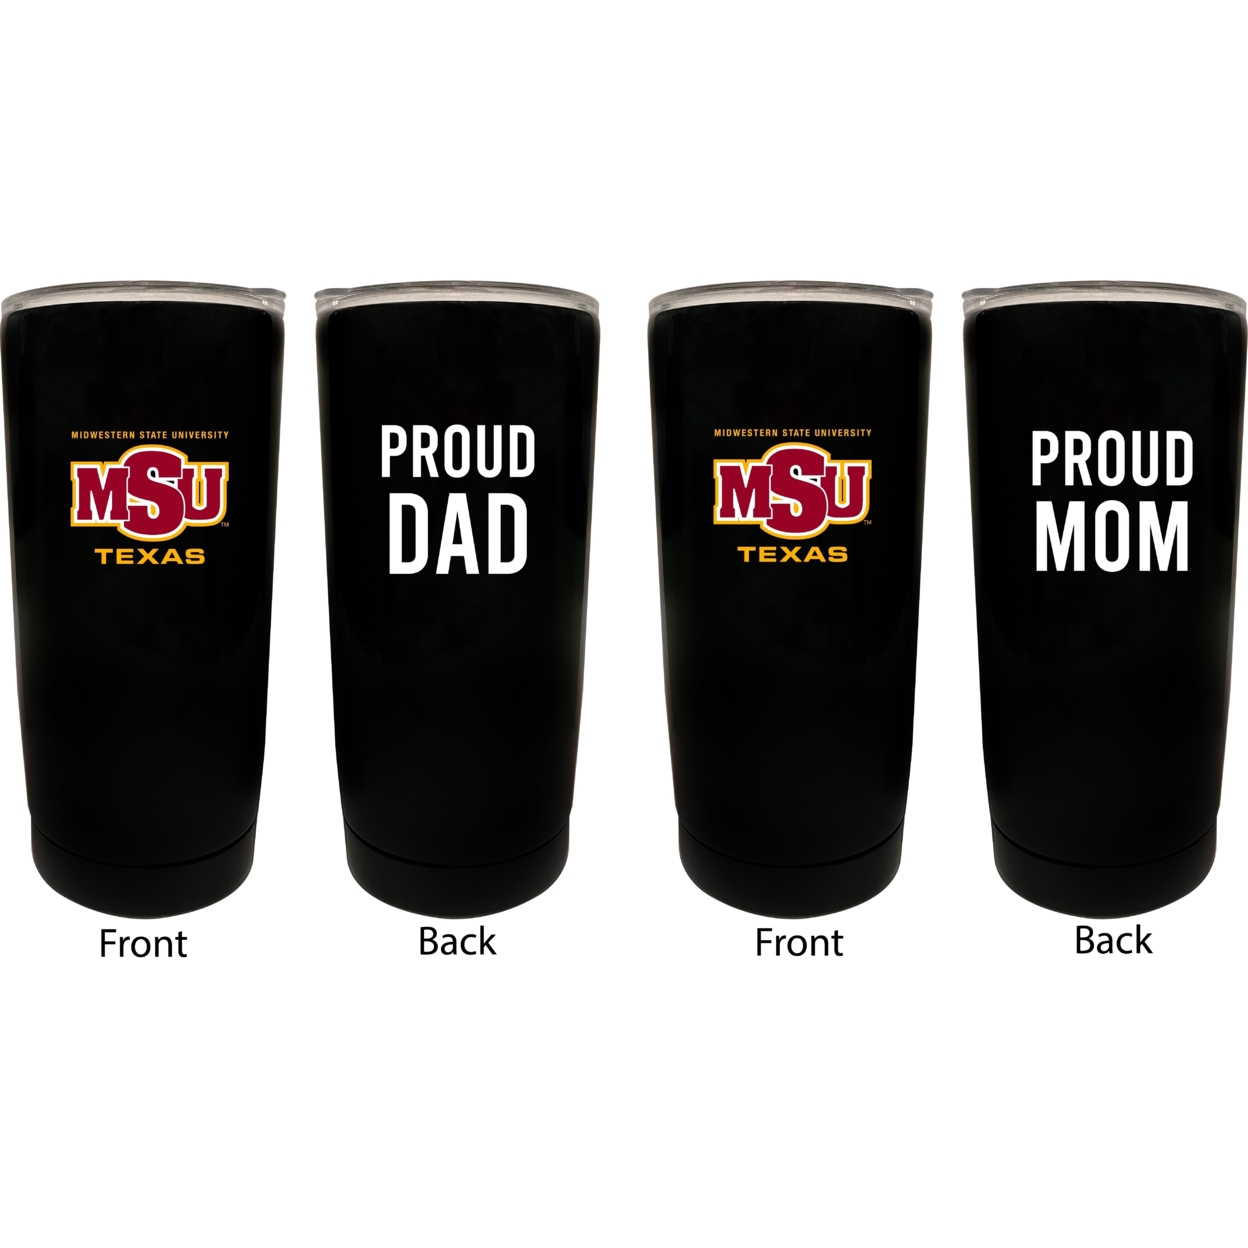 Midwestern State University Mustangs Proud Mom And Dad 16 Oz Insulated Stainless Steel Tumblers 2 Pack Black.